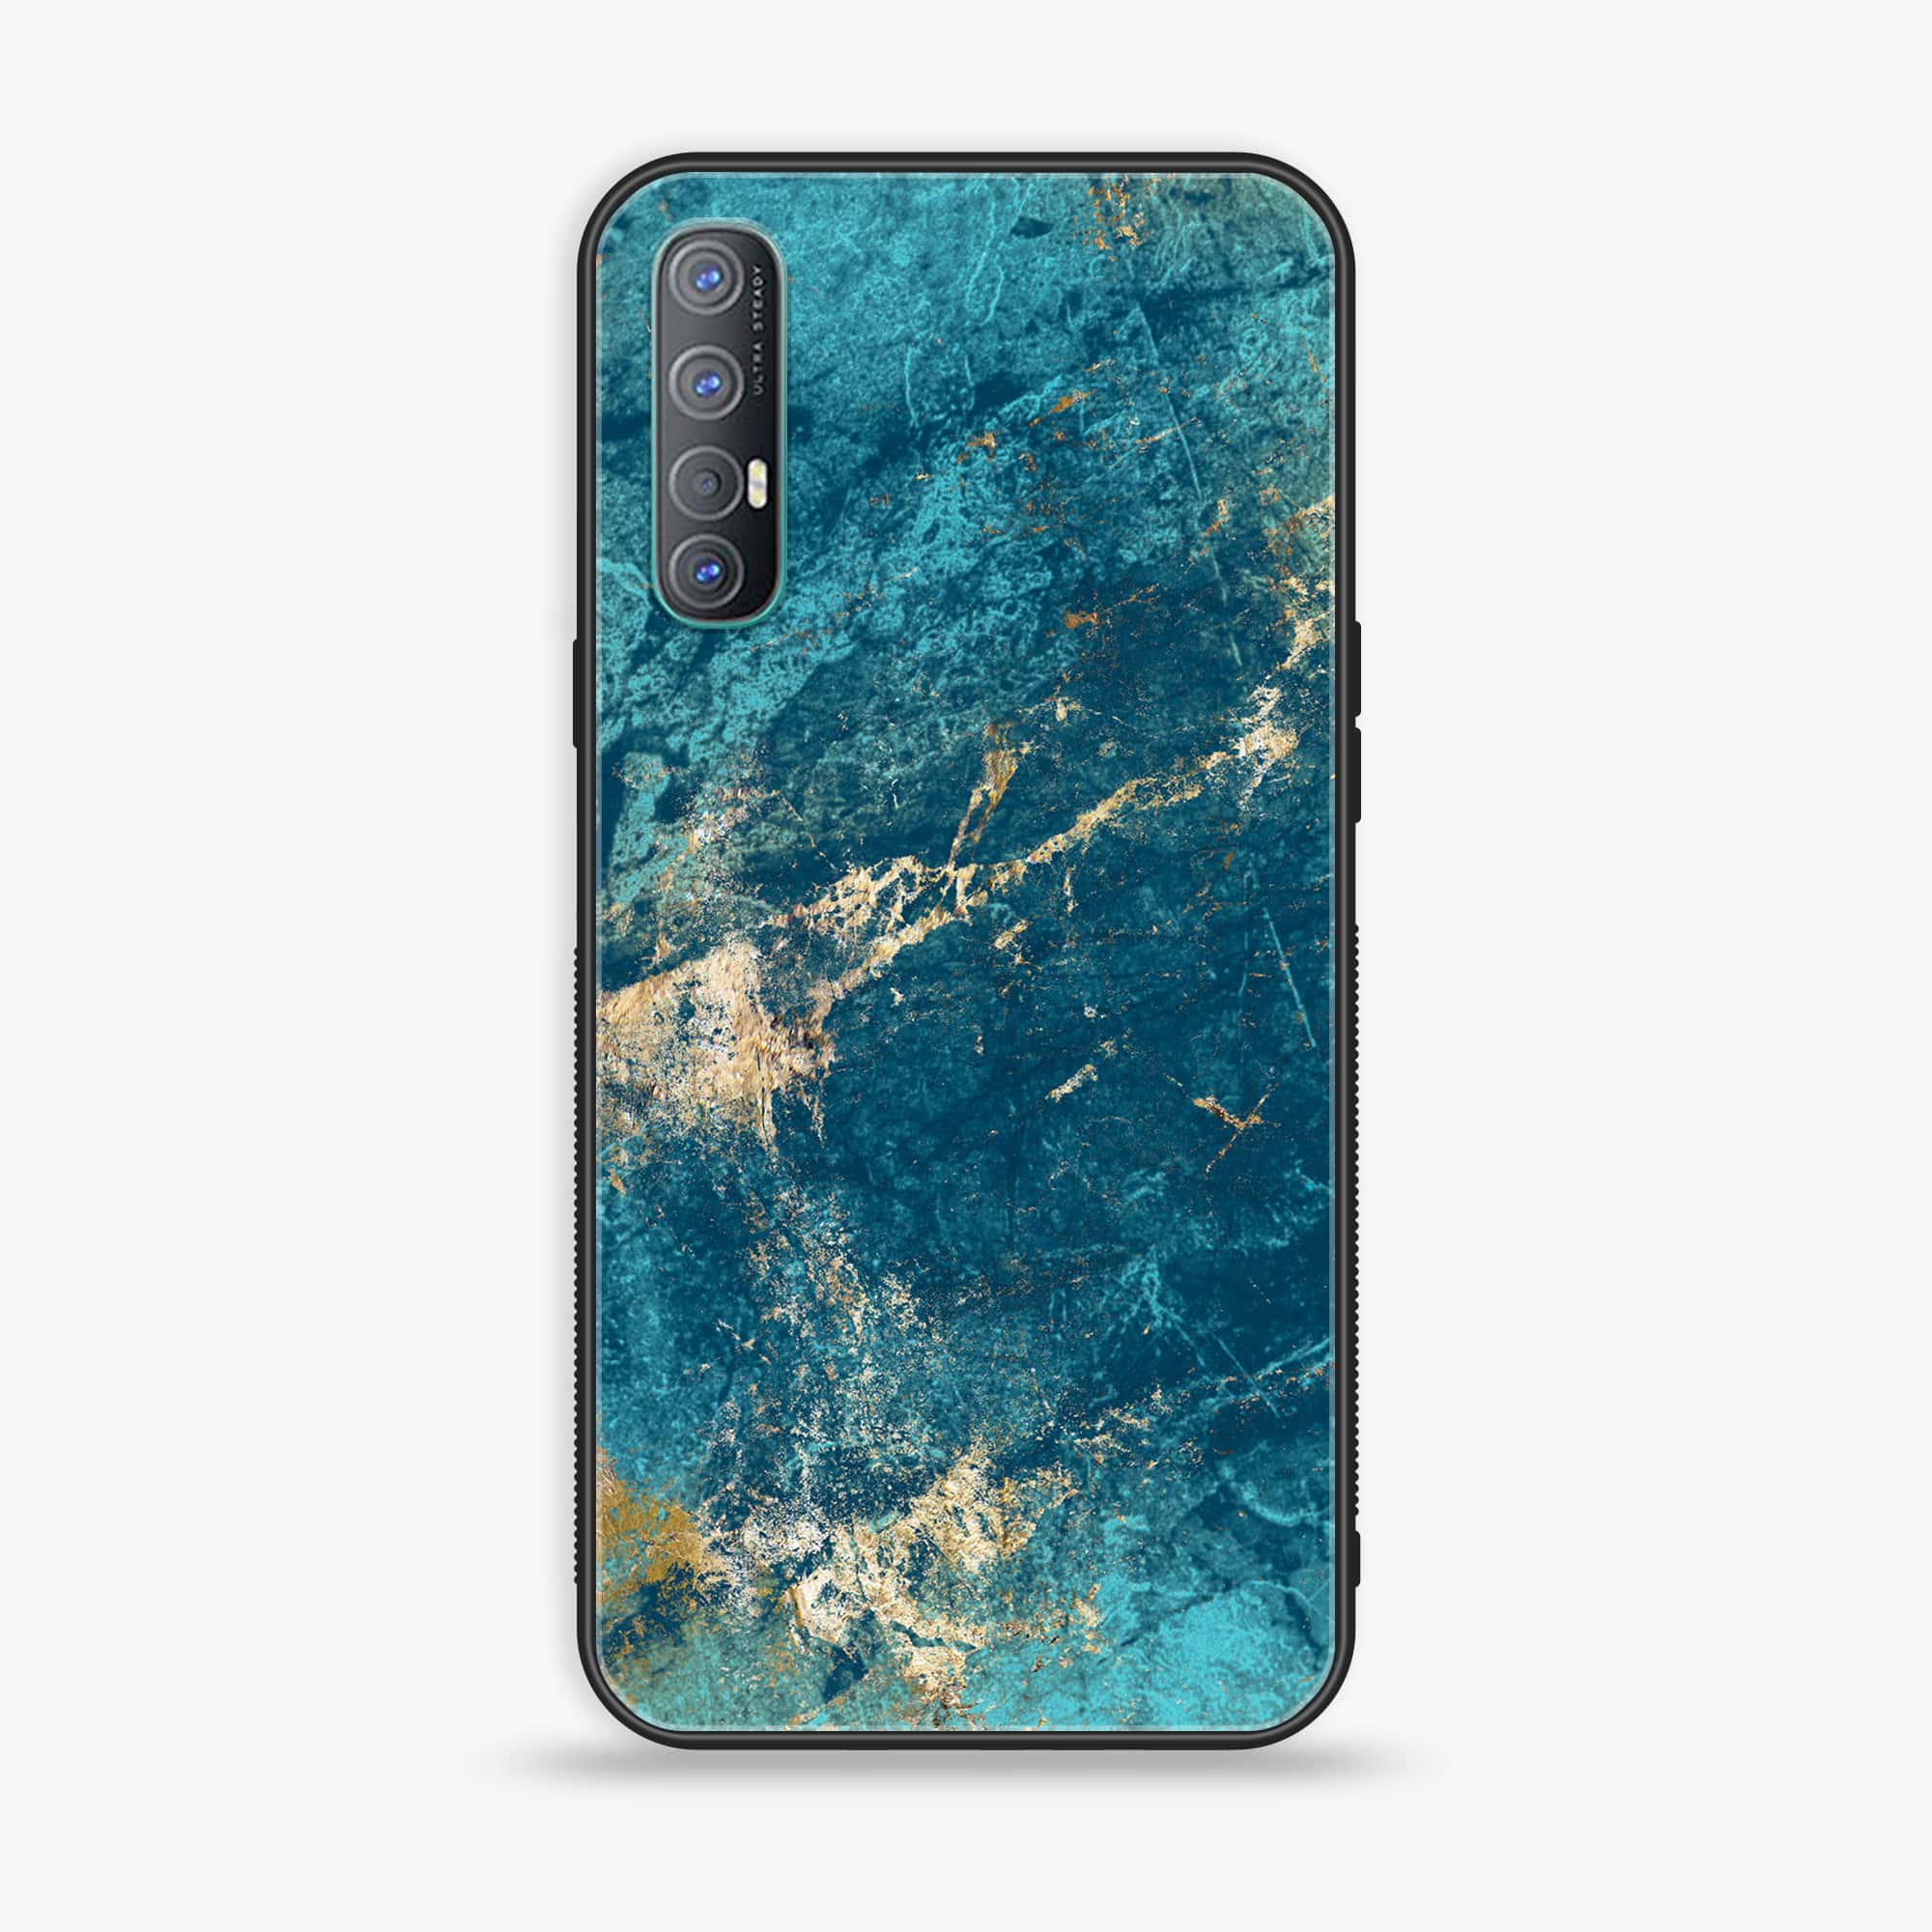 Oppo Find X2 Neo - Blue Marble V 2.0 - Premium Printed Glass soft Bumper shock Proof Case